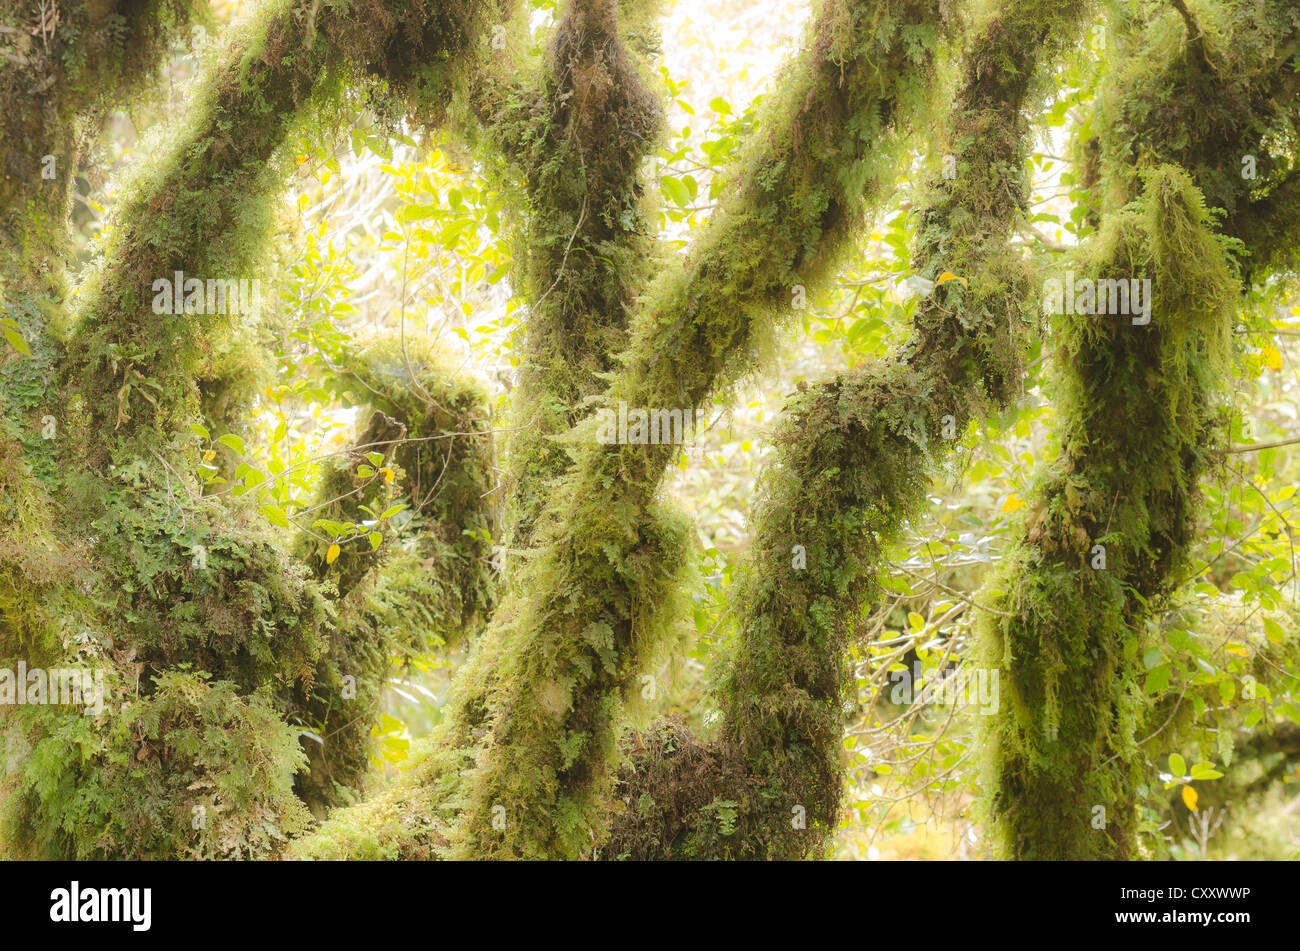 Temperate rainforest vegetation, with moss-covered trees, Mt. Egmont National Park, North Island, New Zealand Stock Photo